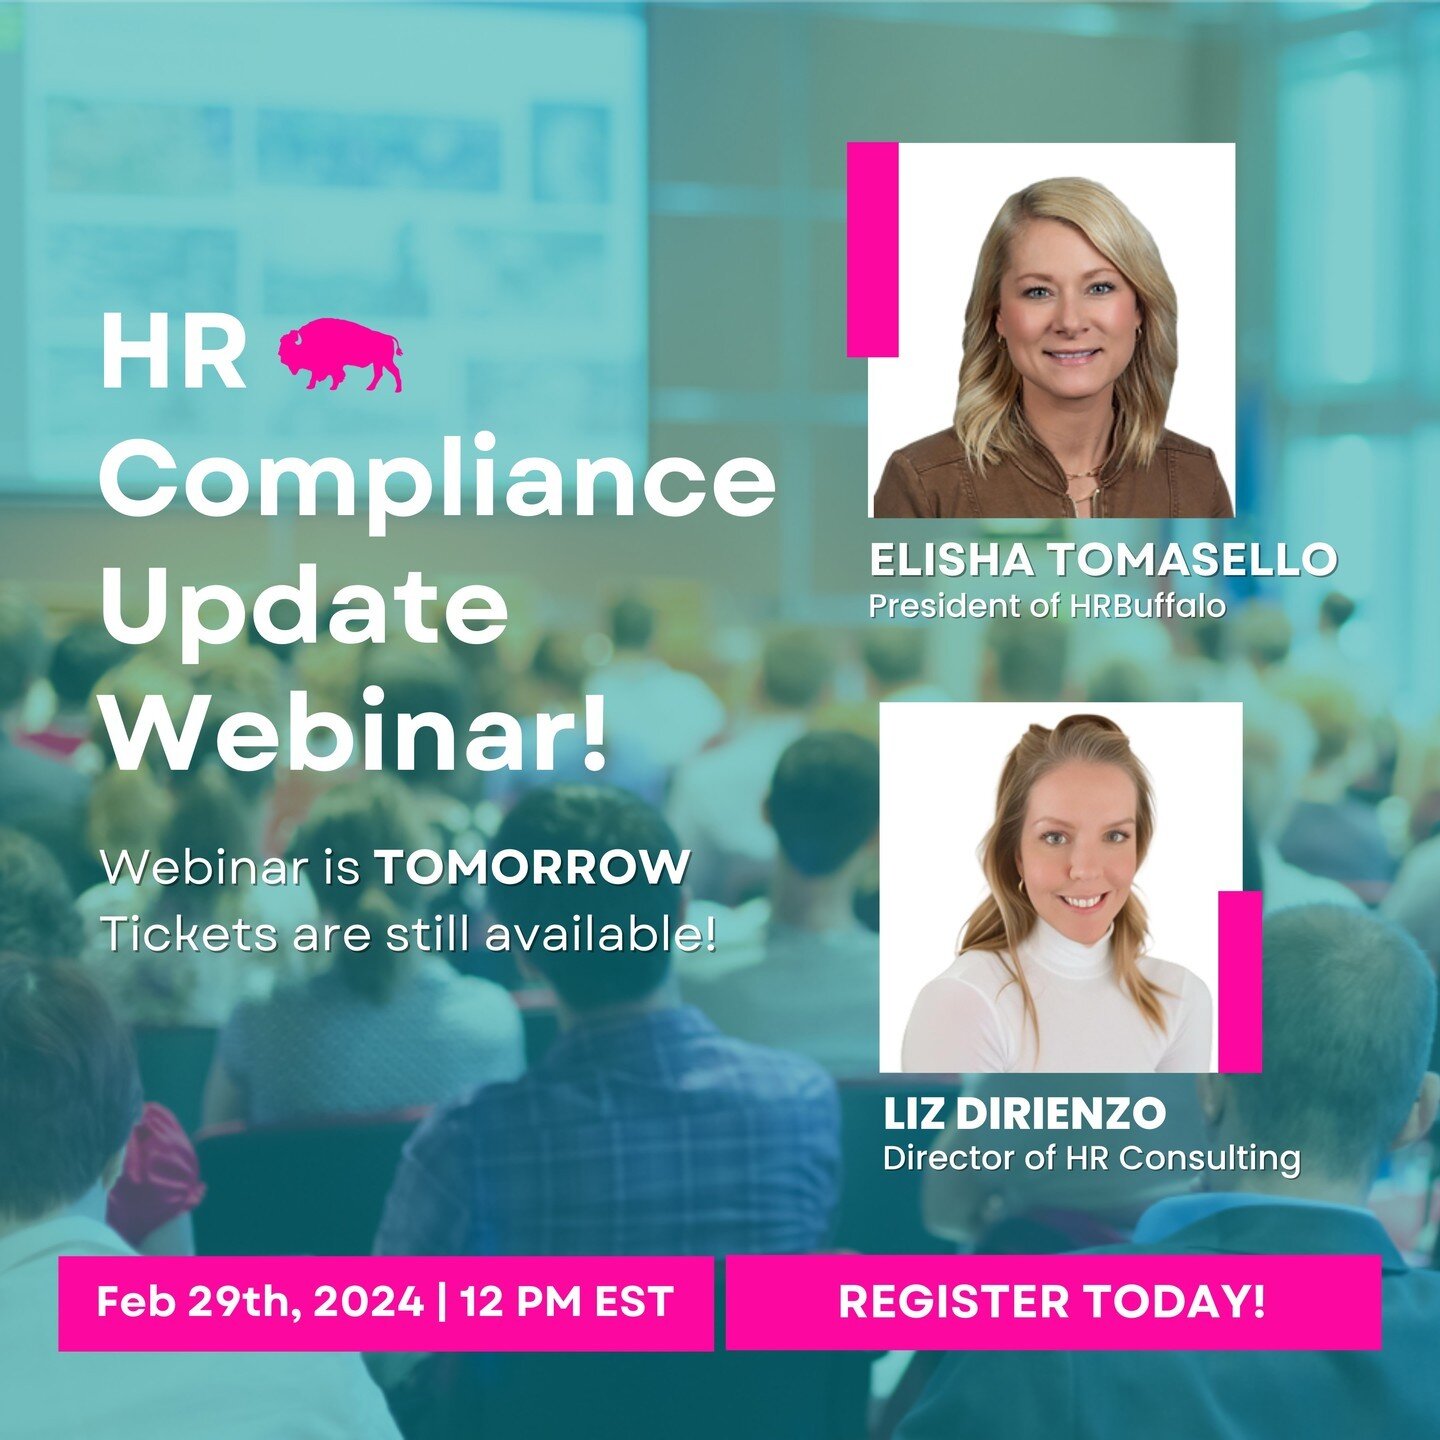 Last Chance to Register! 📅

Join @HRBuffalo tomorrow at 12:00 pm EST, for the Human Resources Compliance Update Webinar! This webinar will provide an overview of new legal requirements, best practices, and tools to help you ensure your organization 